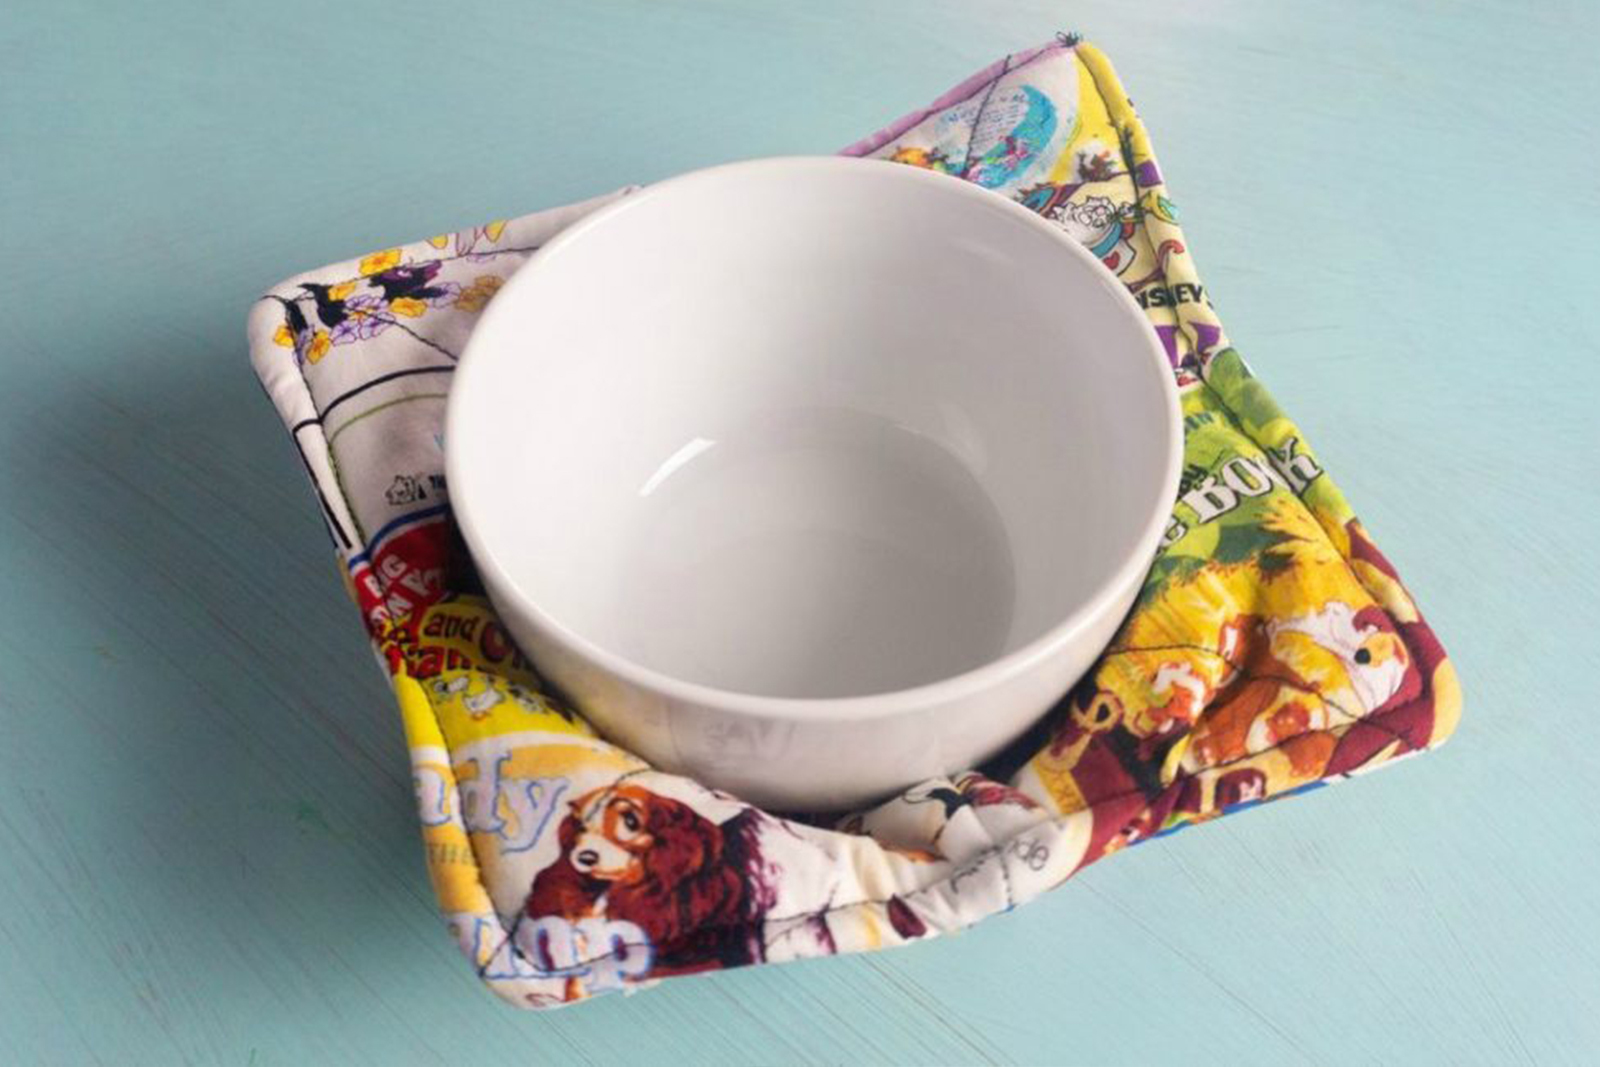 A white bowl sits in a fabric bowl cozy with a colorful pattern